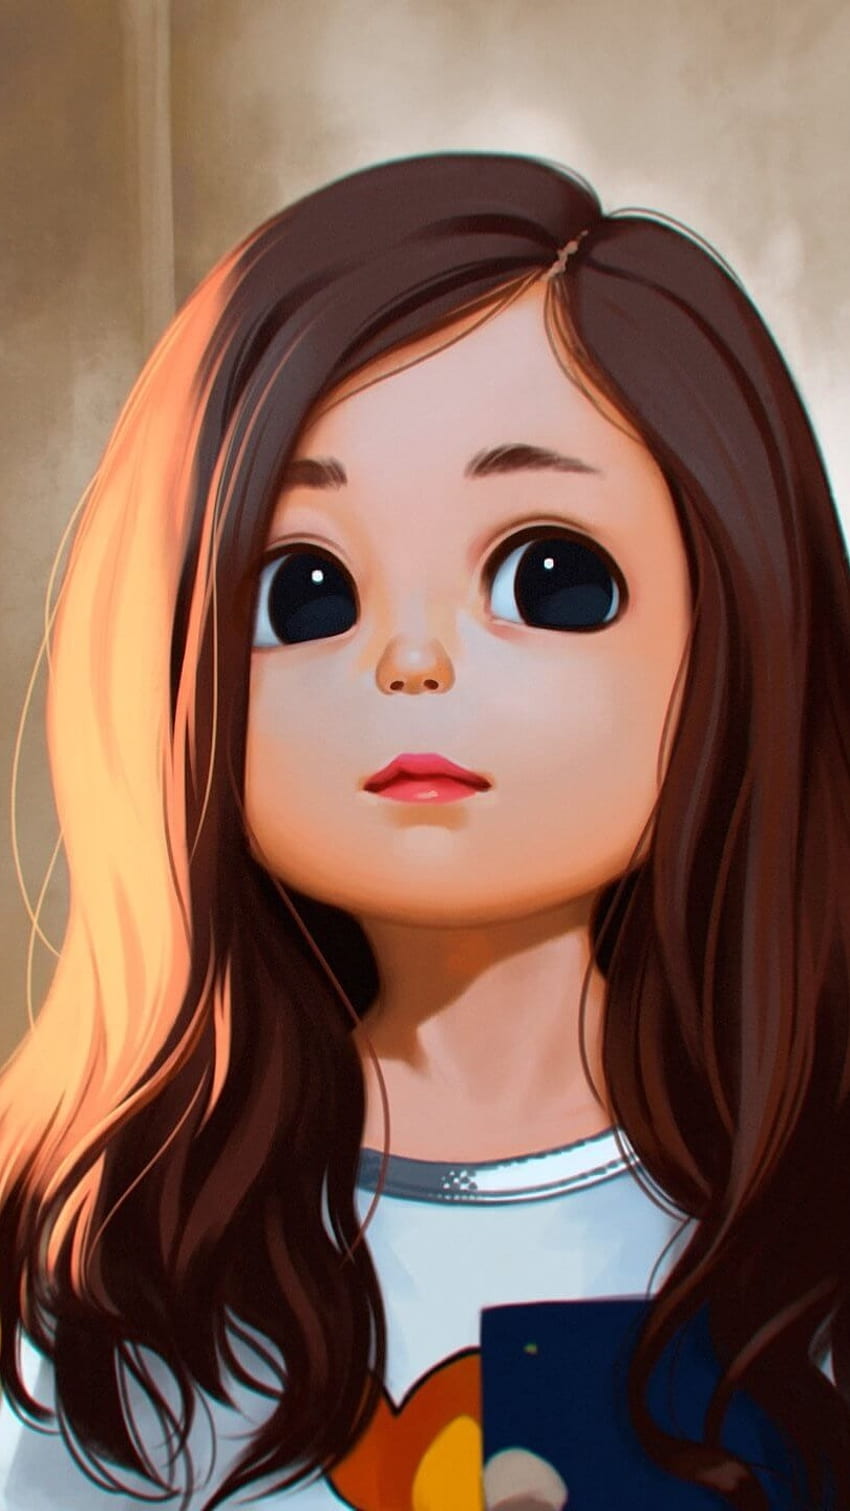 Astonishing Compilation: 999+ Captivating Cute Girl Cartoon Images in Full 4K Quality